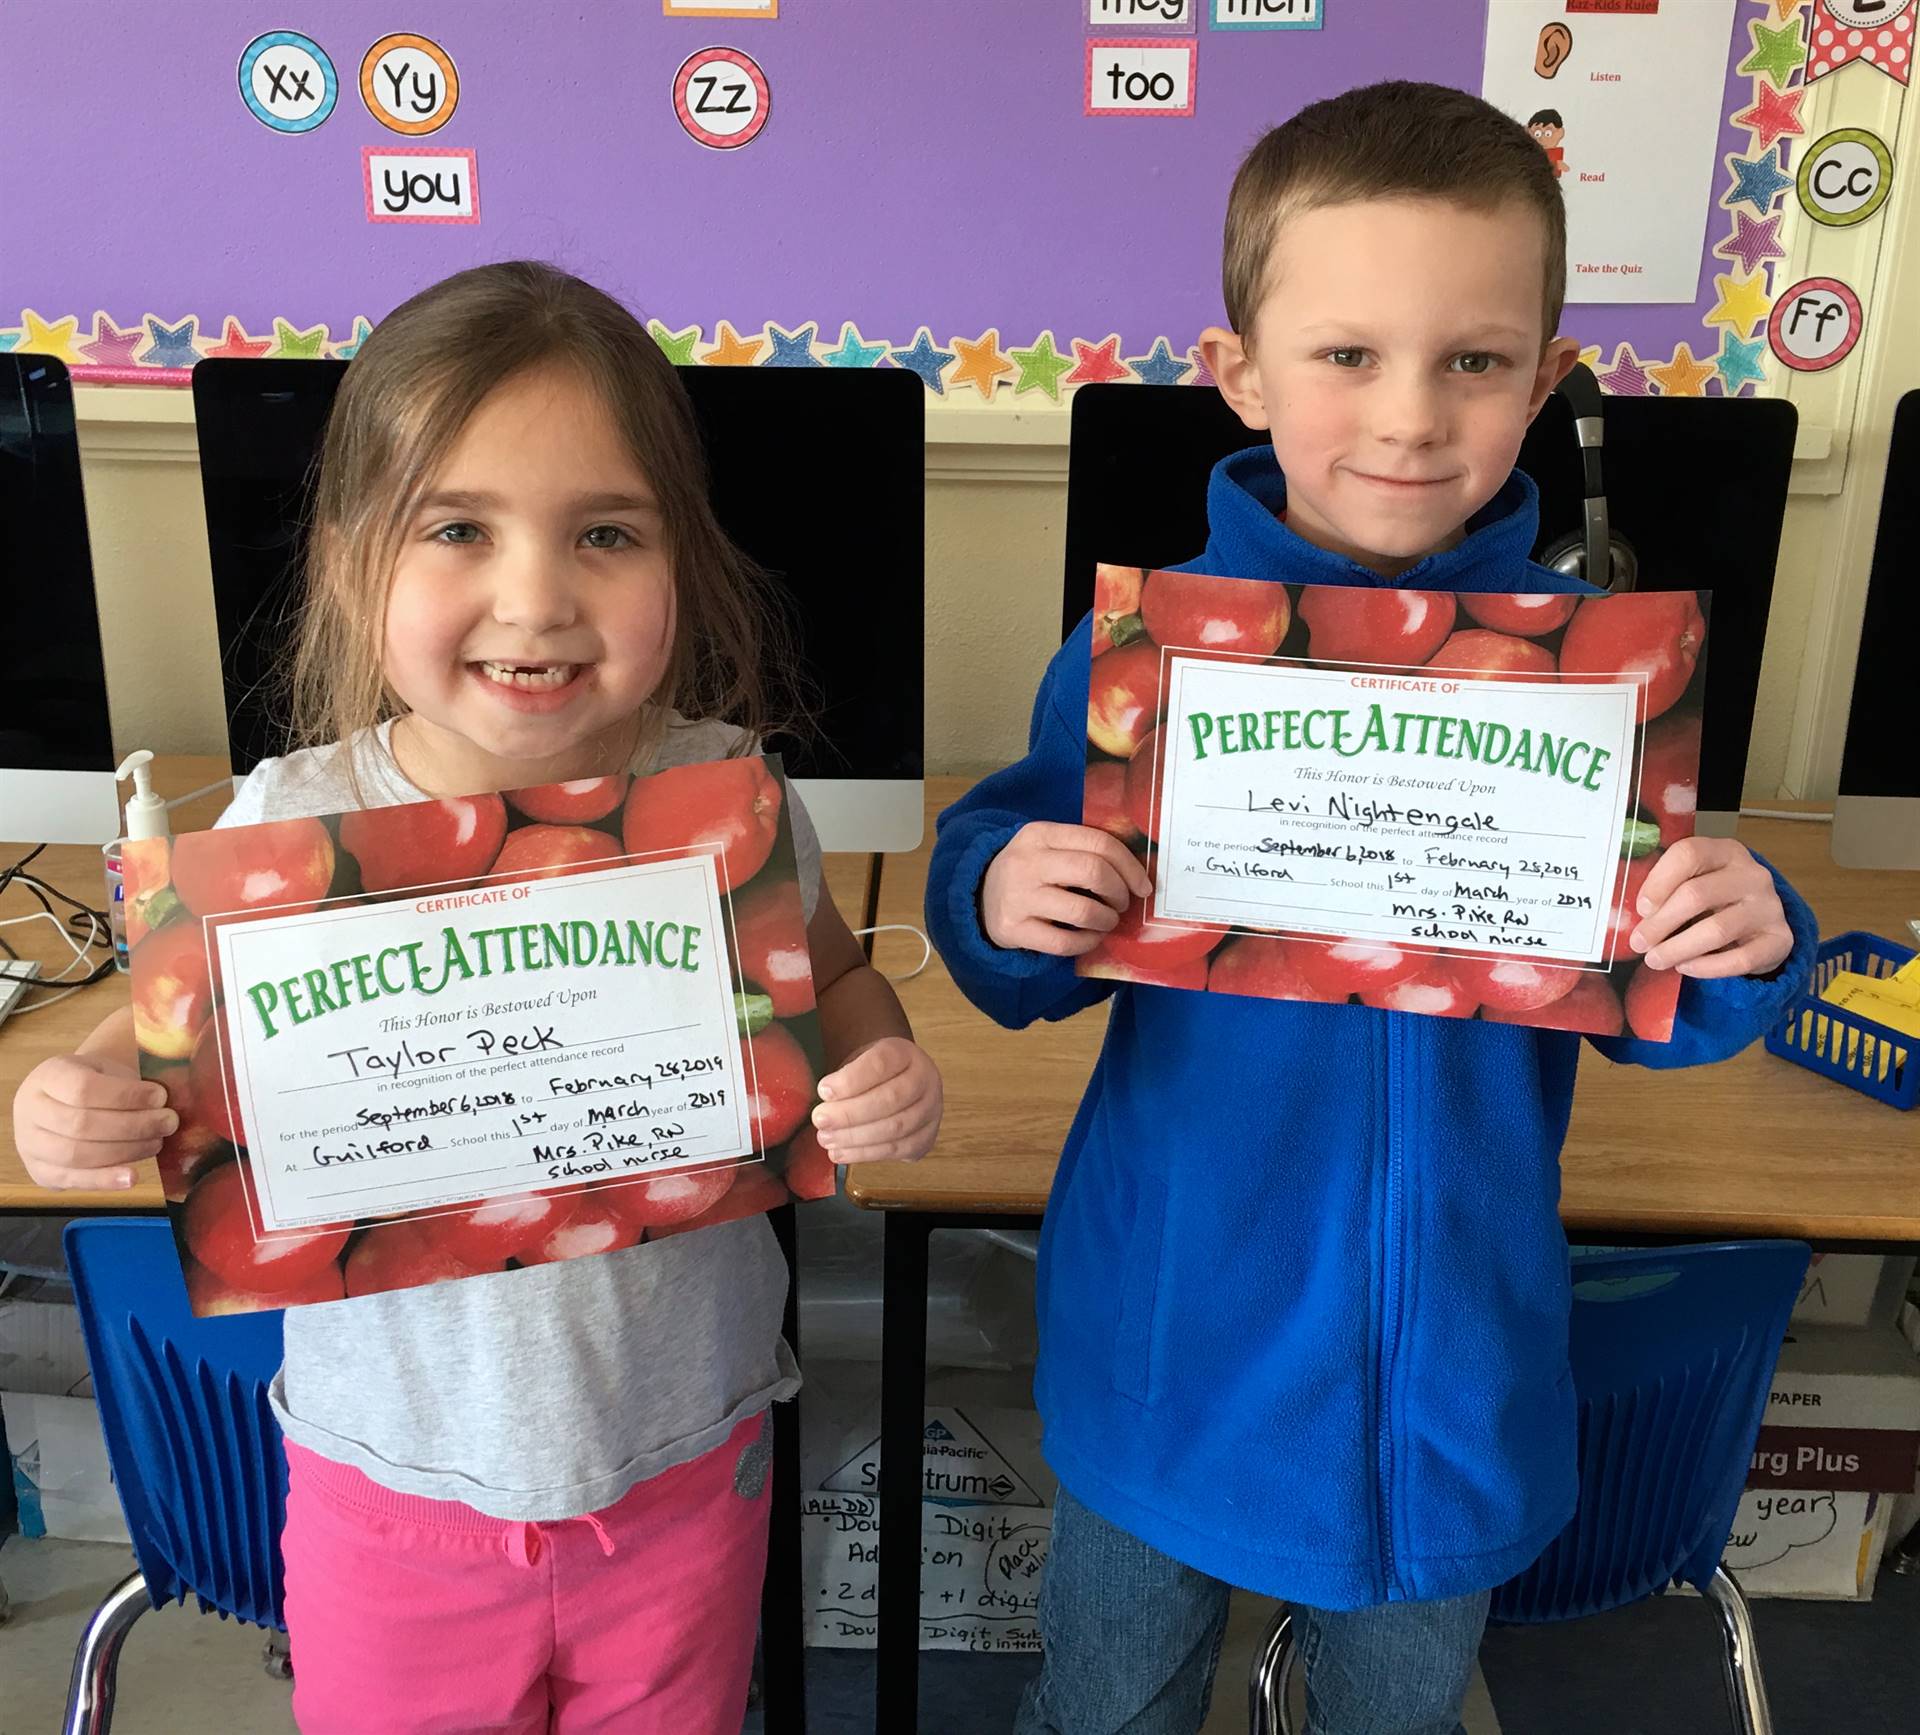 2 students with perfect 100 days attendance!